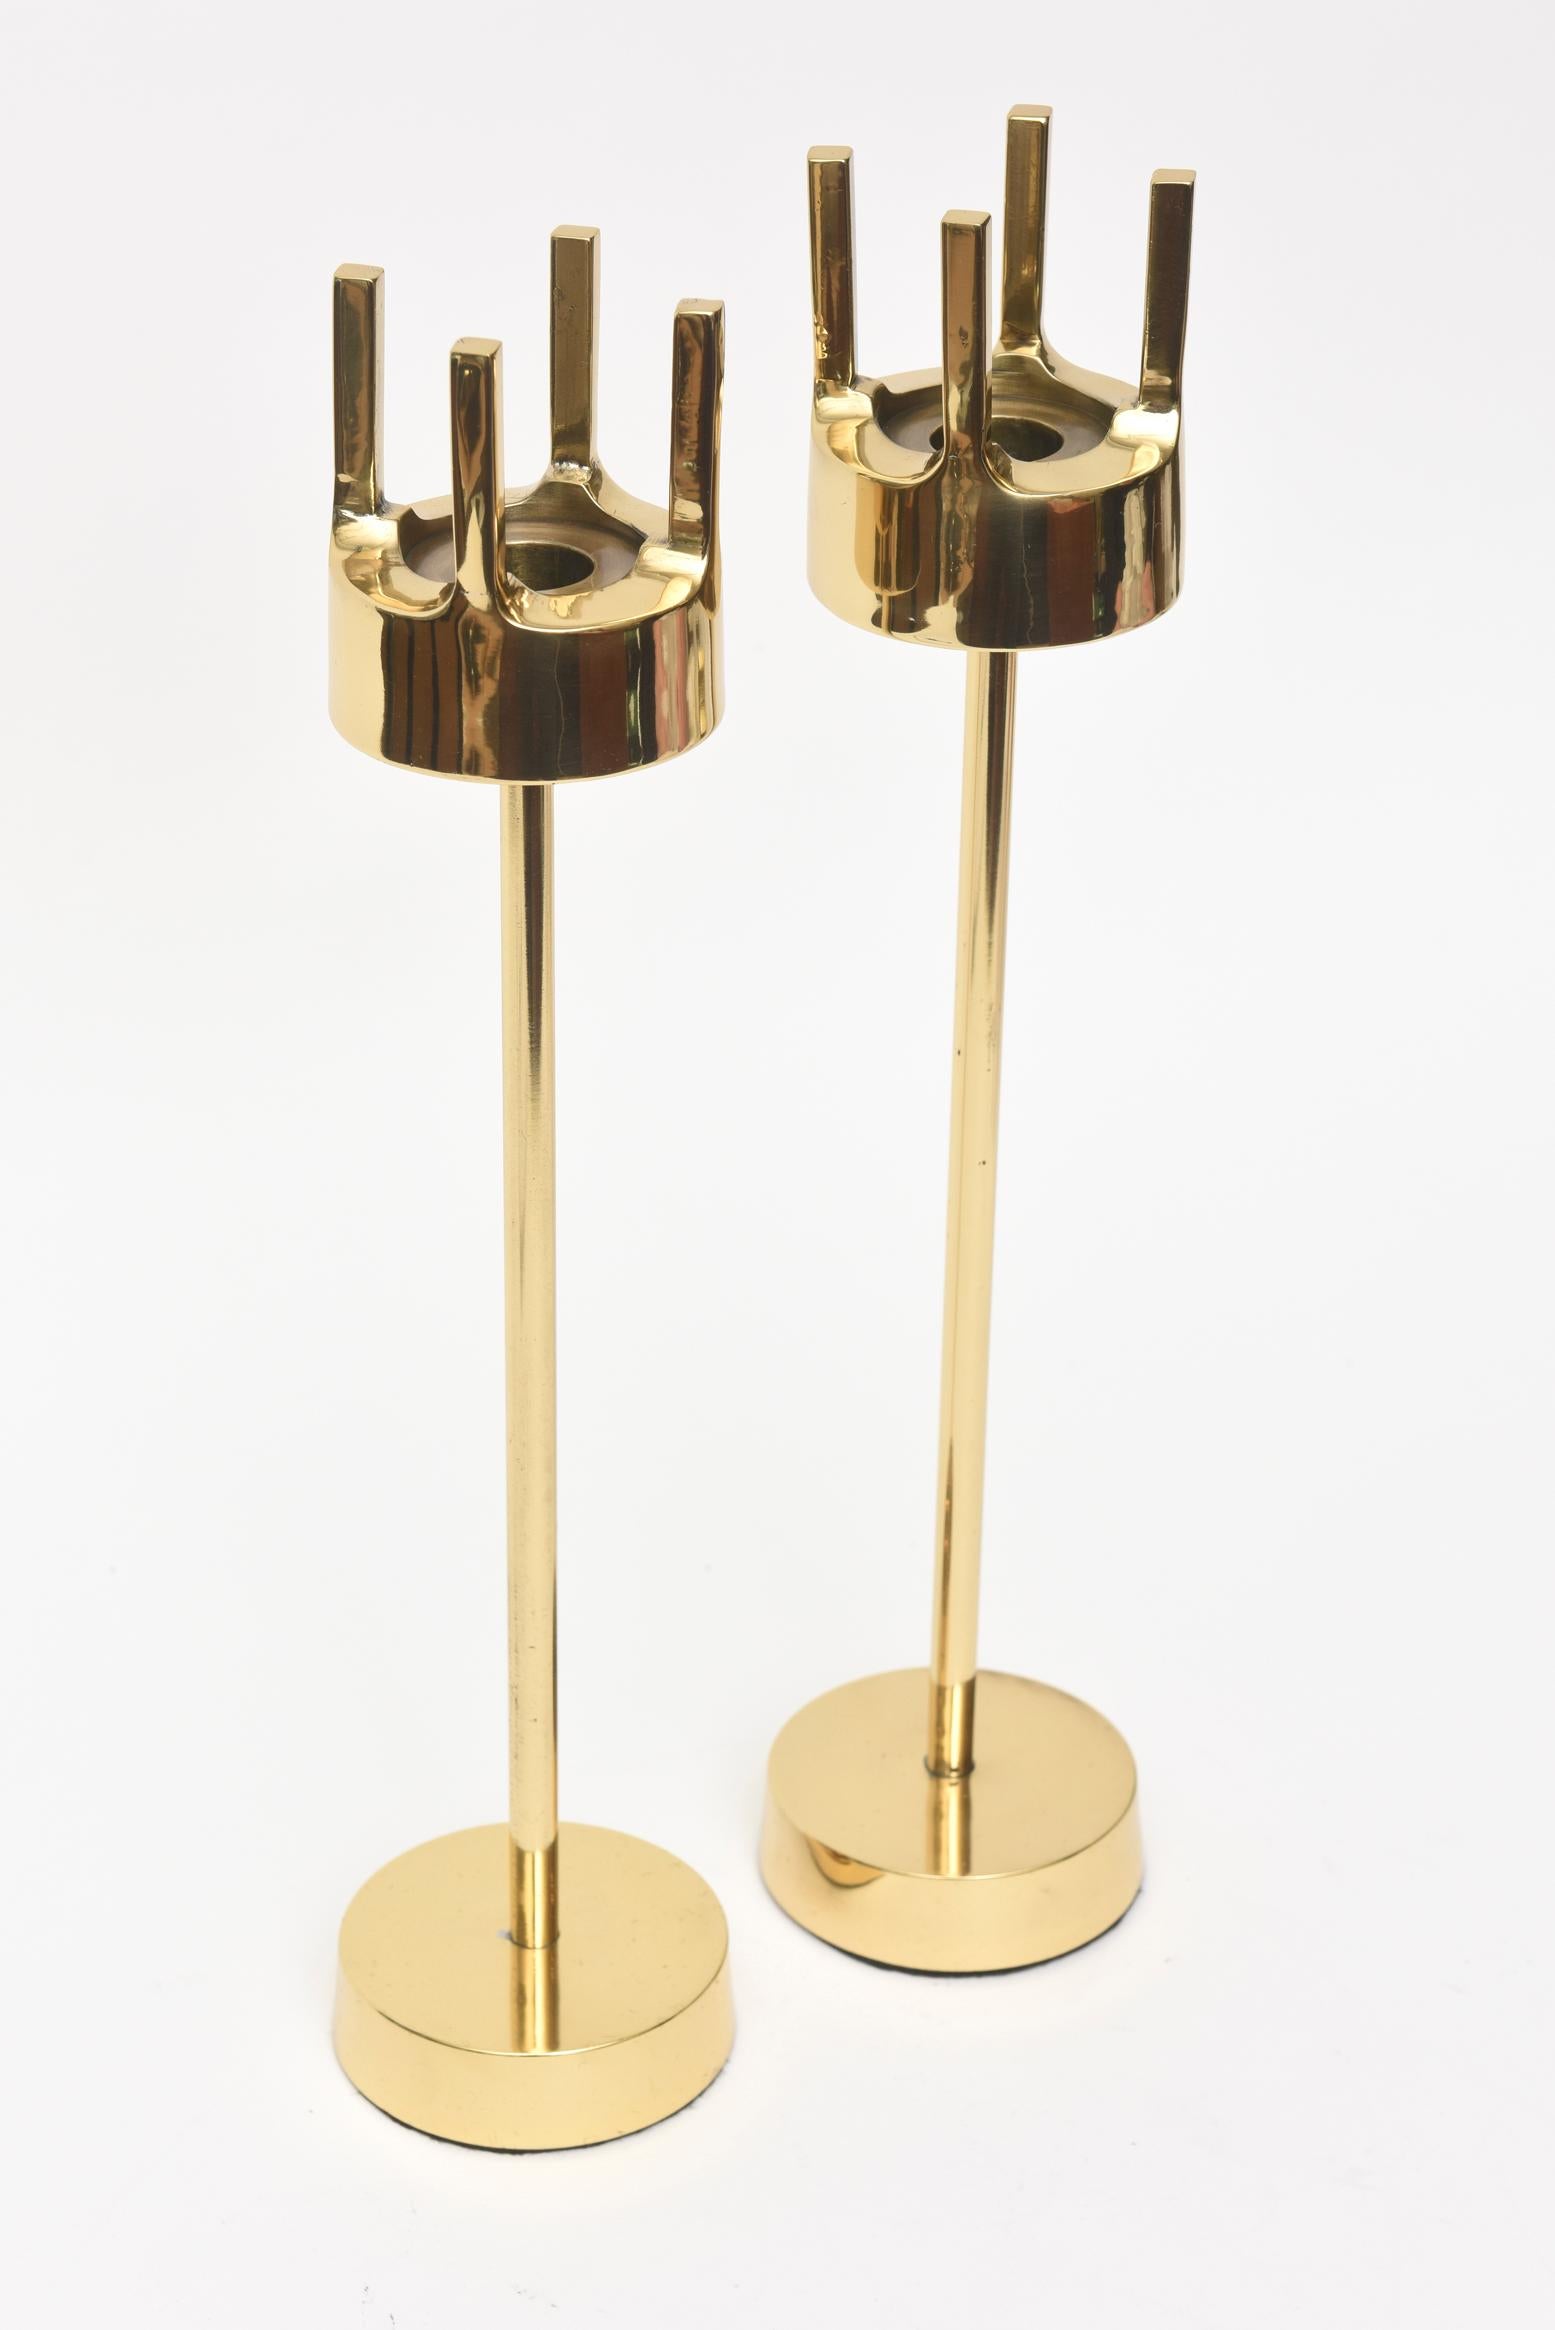 This great pair of vintage Swedish polished brass modernist midcentury brass candlesticks are in the style and attribution of Pierre Forsell for Skultana. Their period is late 1950s-early 1960s. They are not signed. They are sculptural, artful and